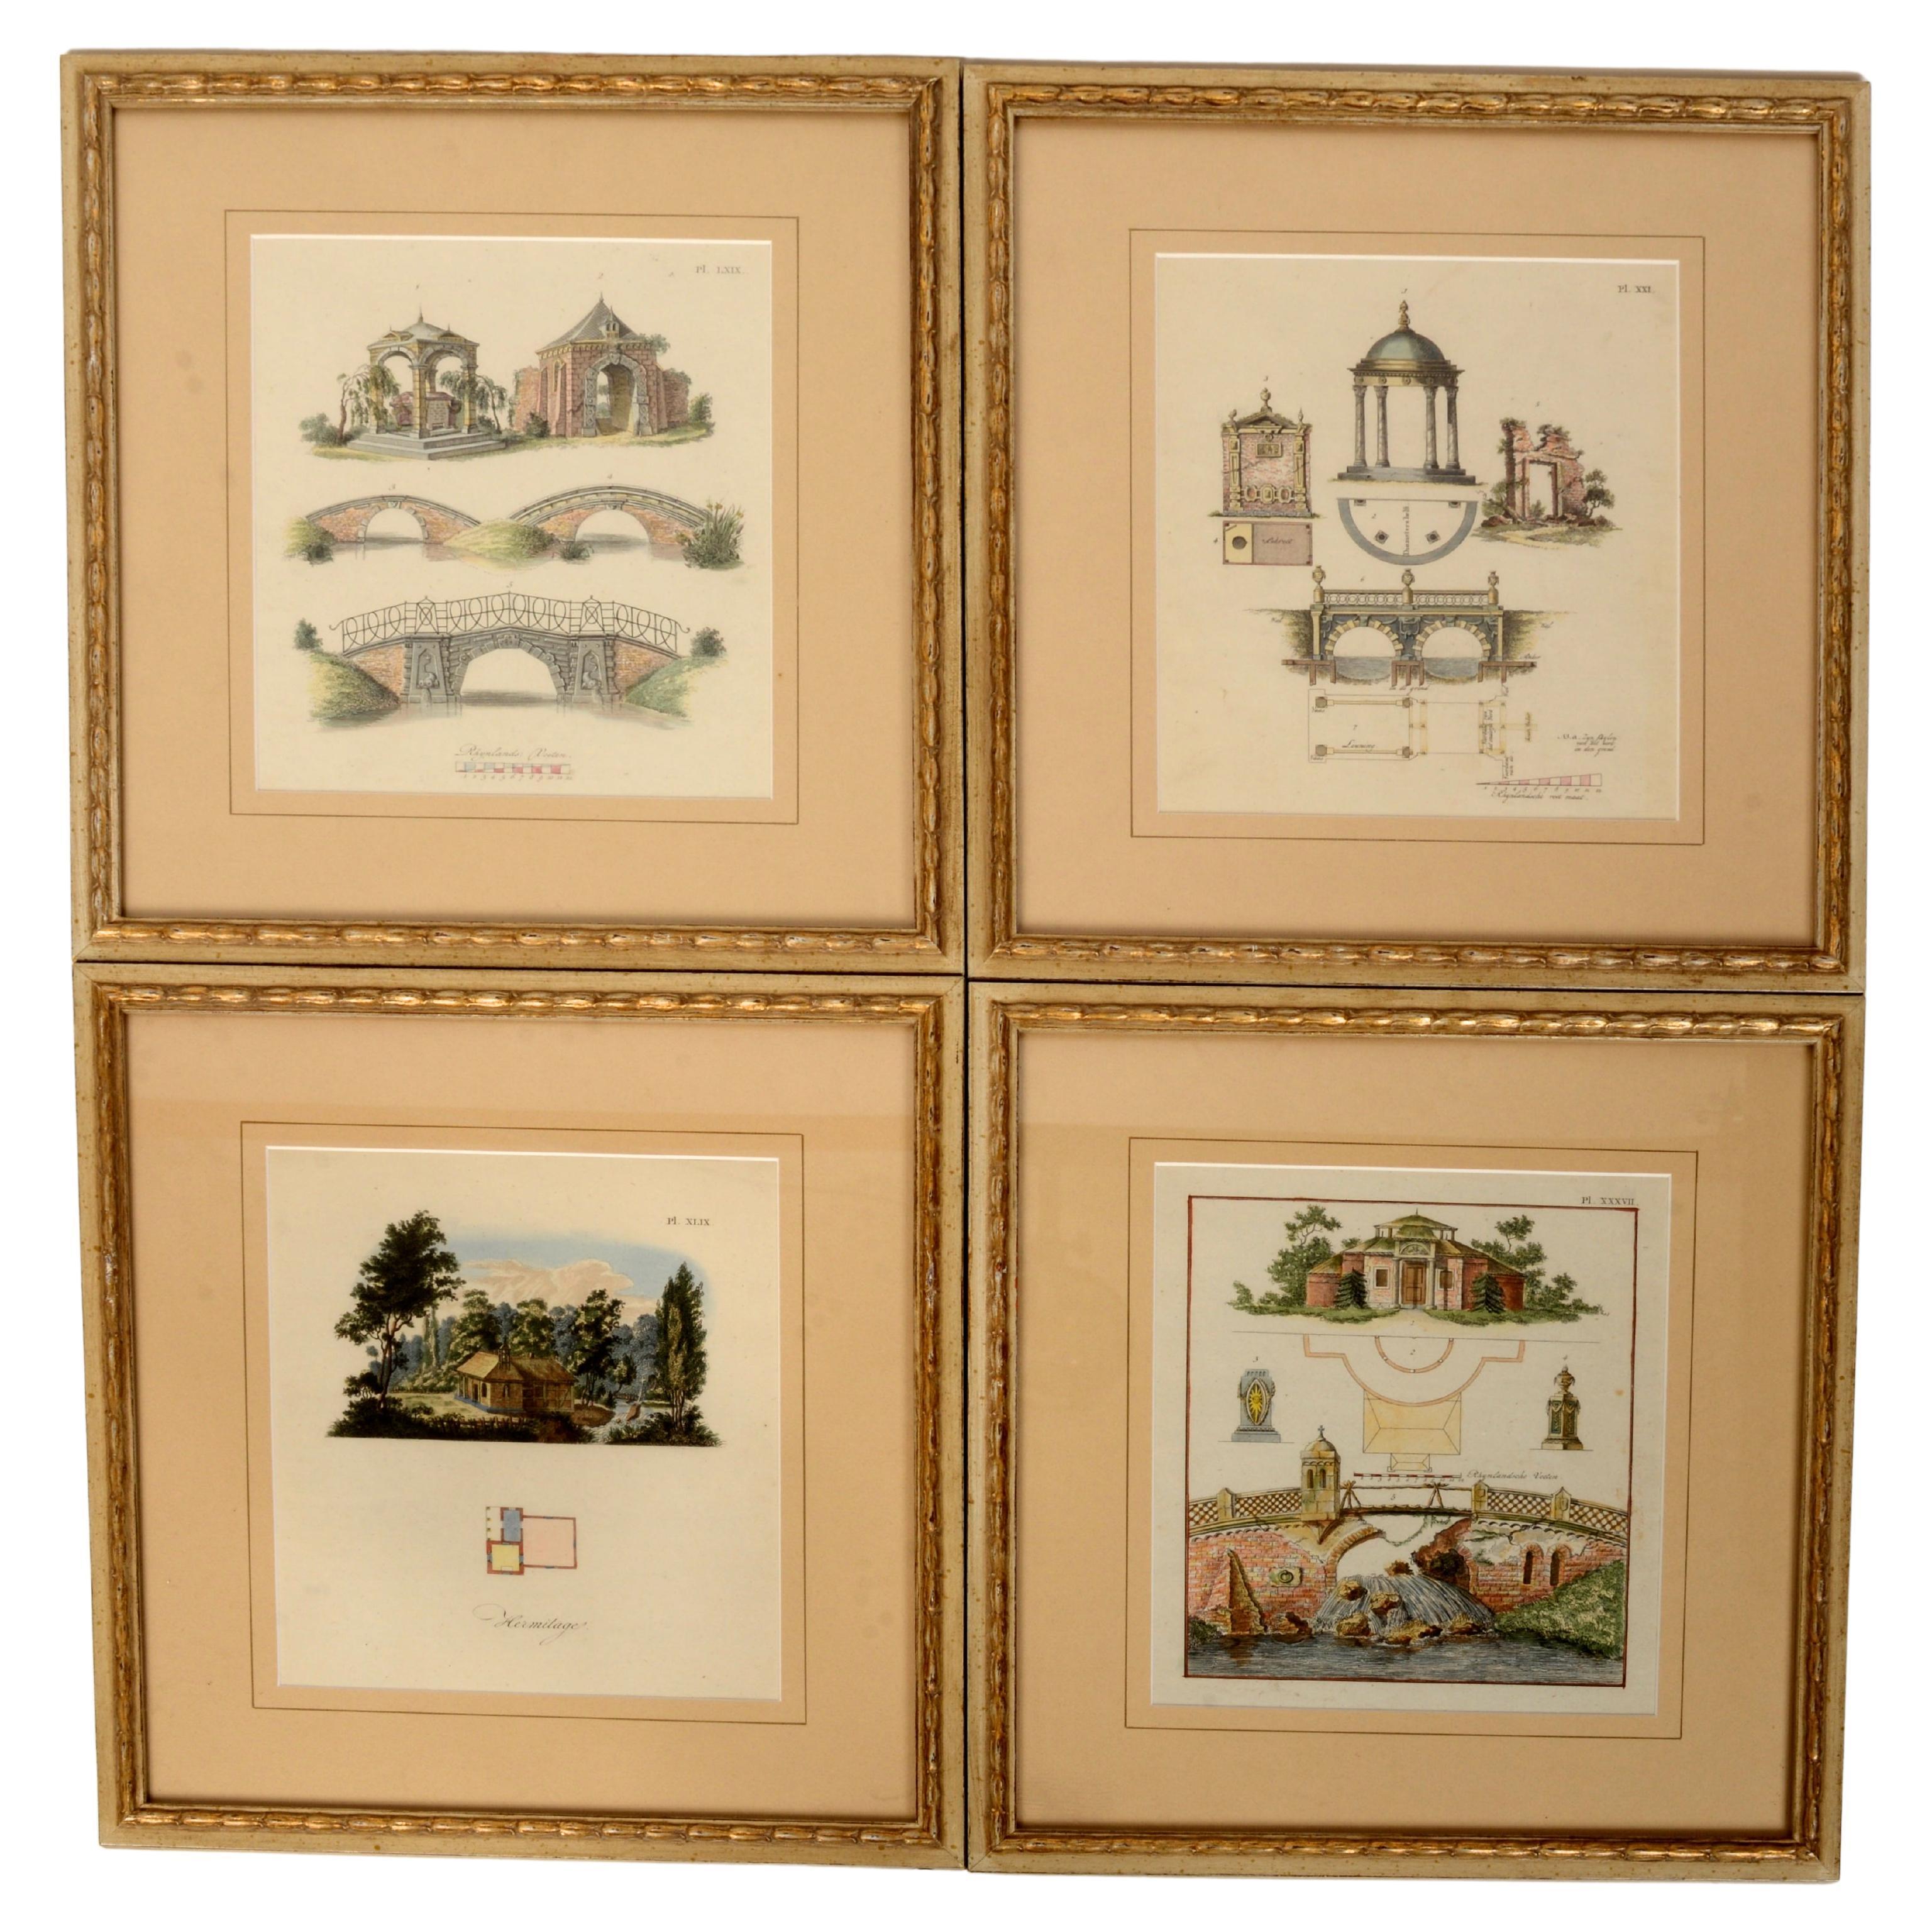 Four Hand Colored Antique Engravings of Garden Architecture by Van Laar, c1802